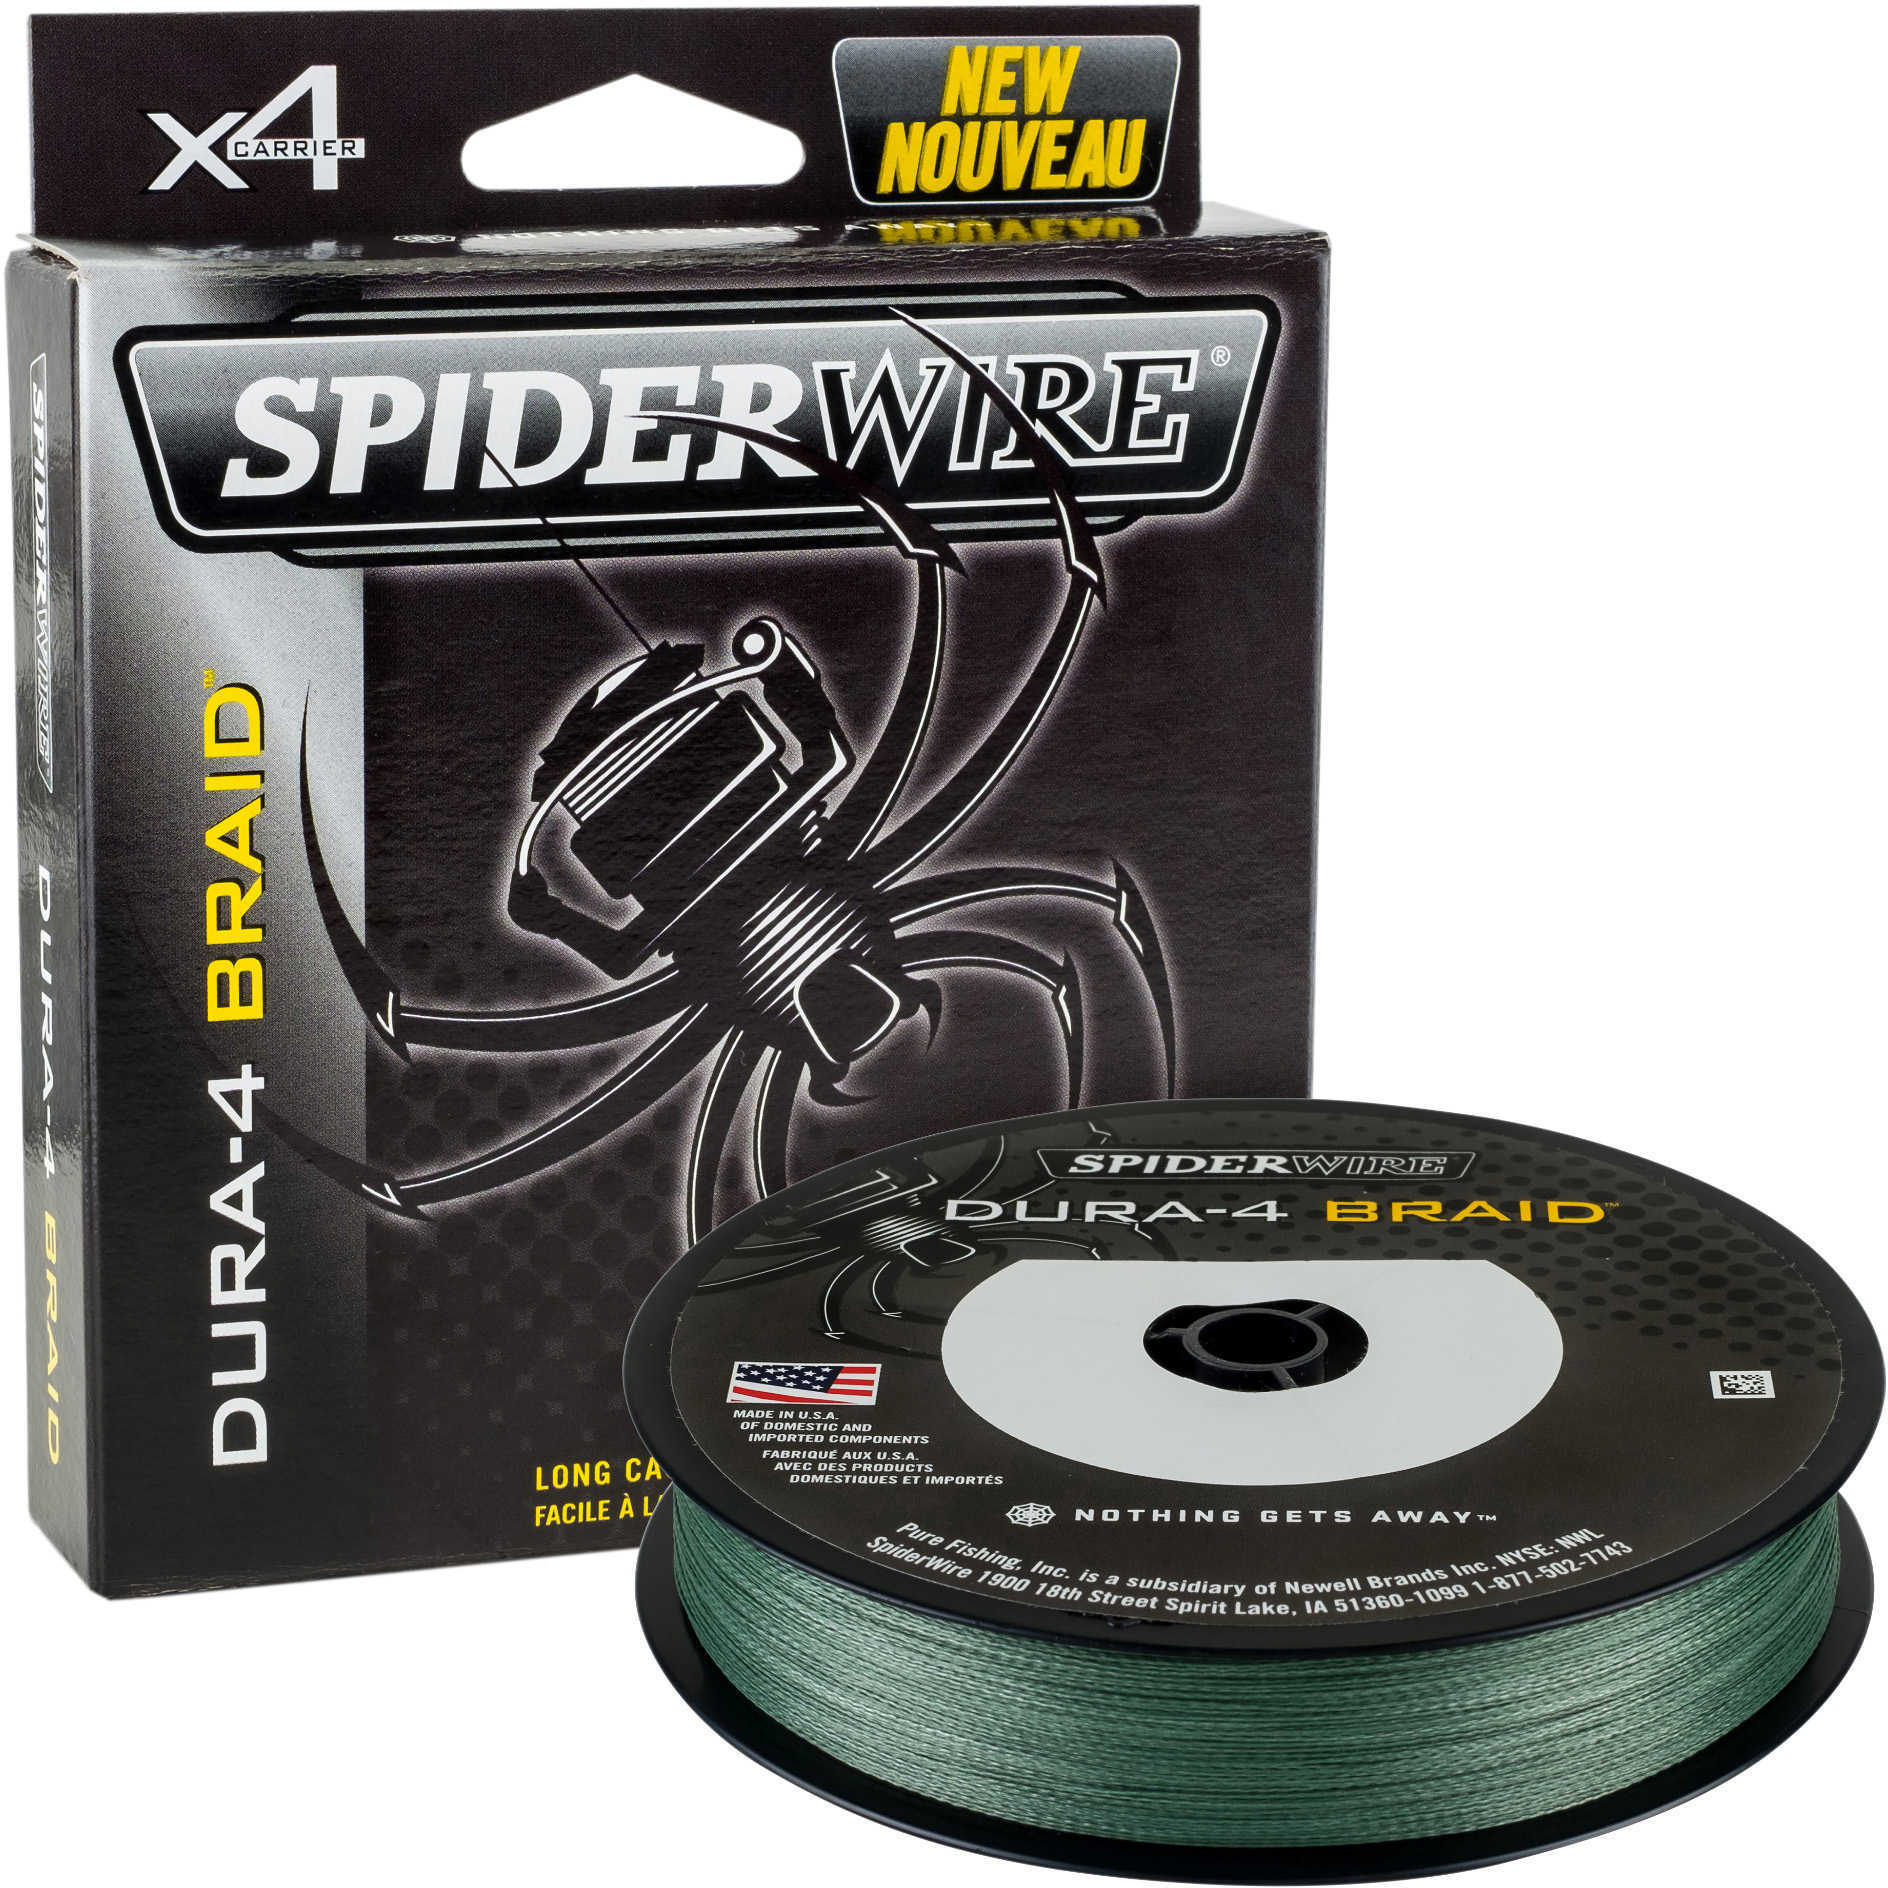 Spiderwire Dura-4 Braided Line 125 Yards , 65 lbs Tested, 0.015" Diameter, Moss Green